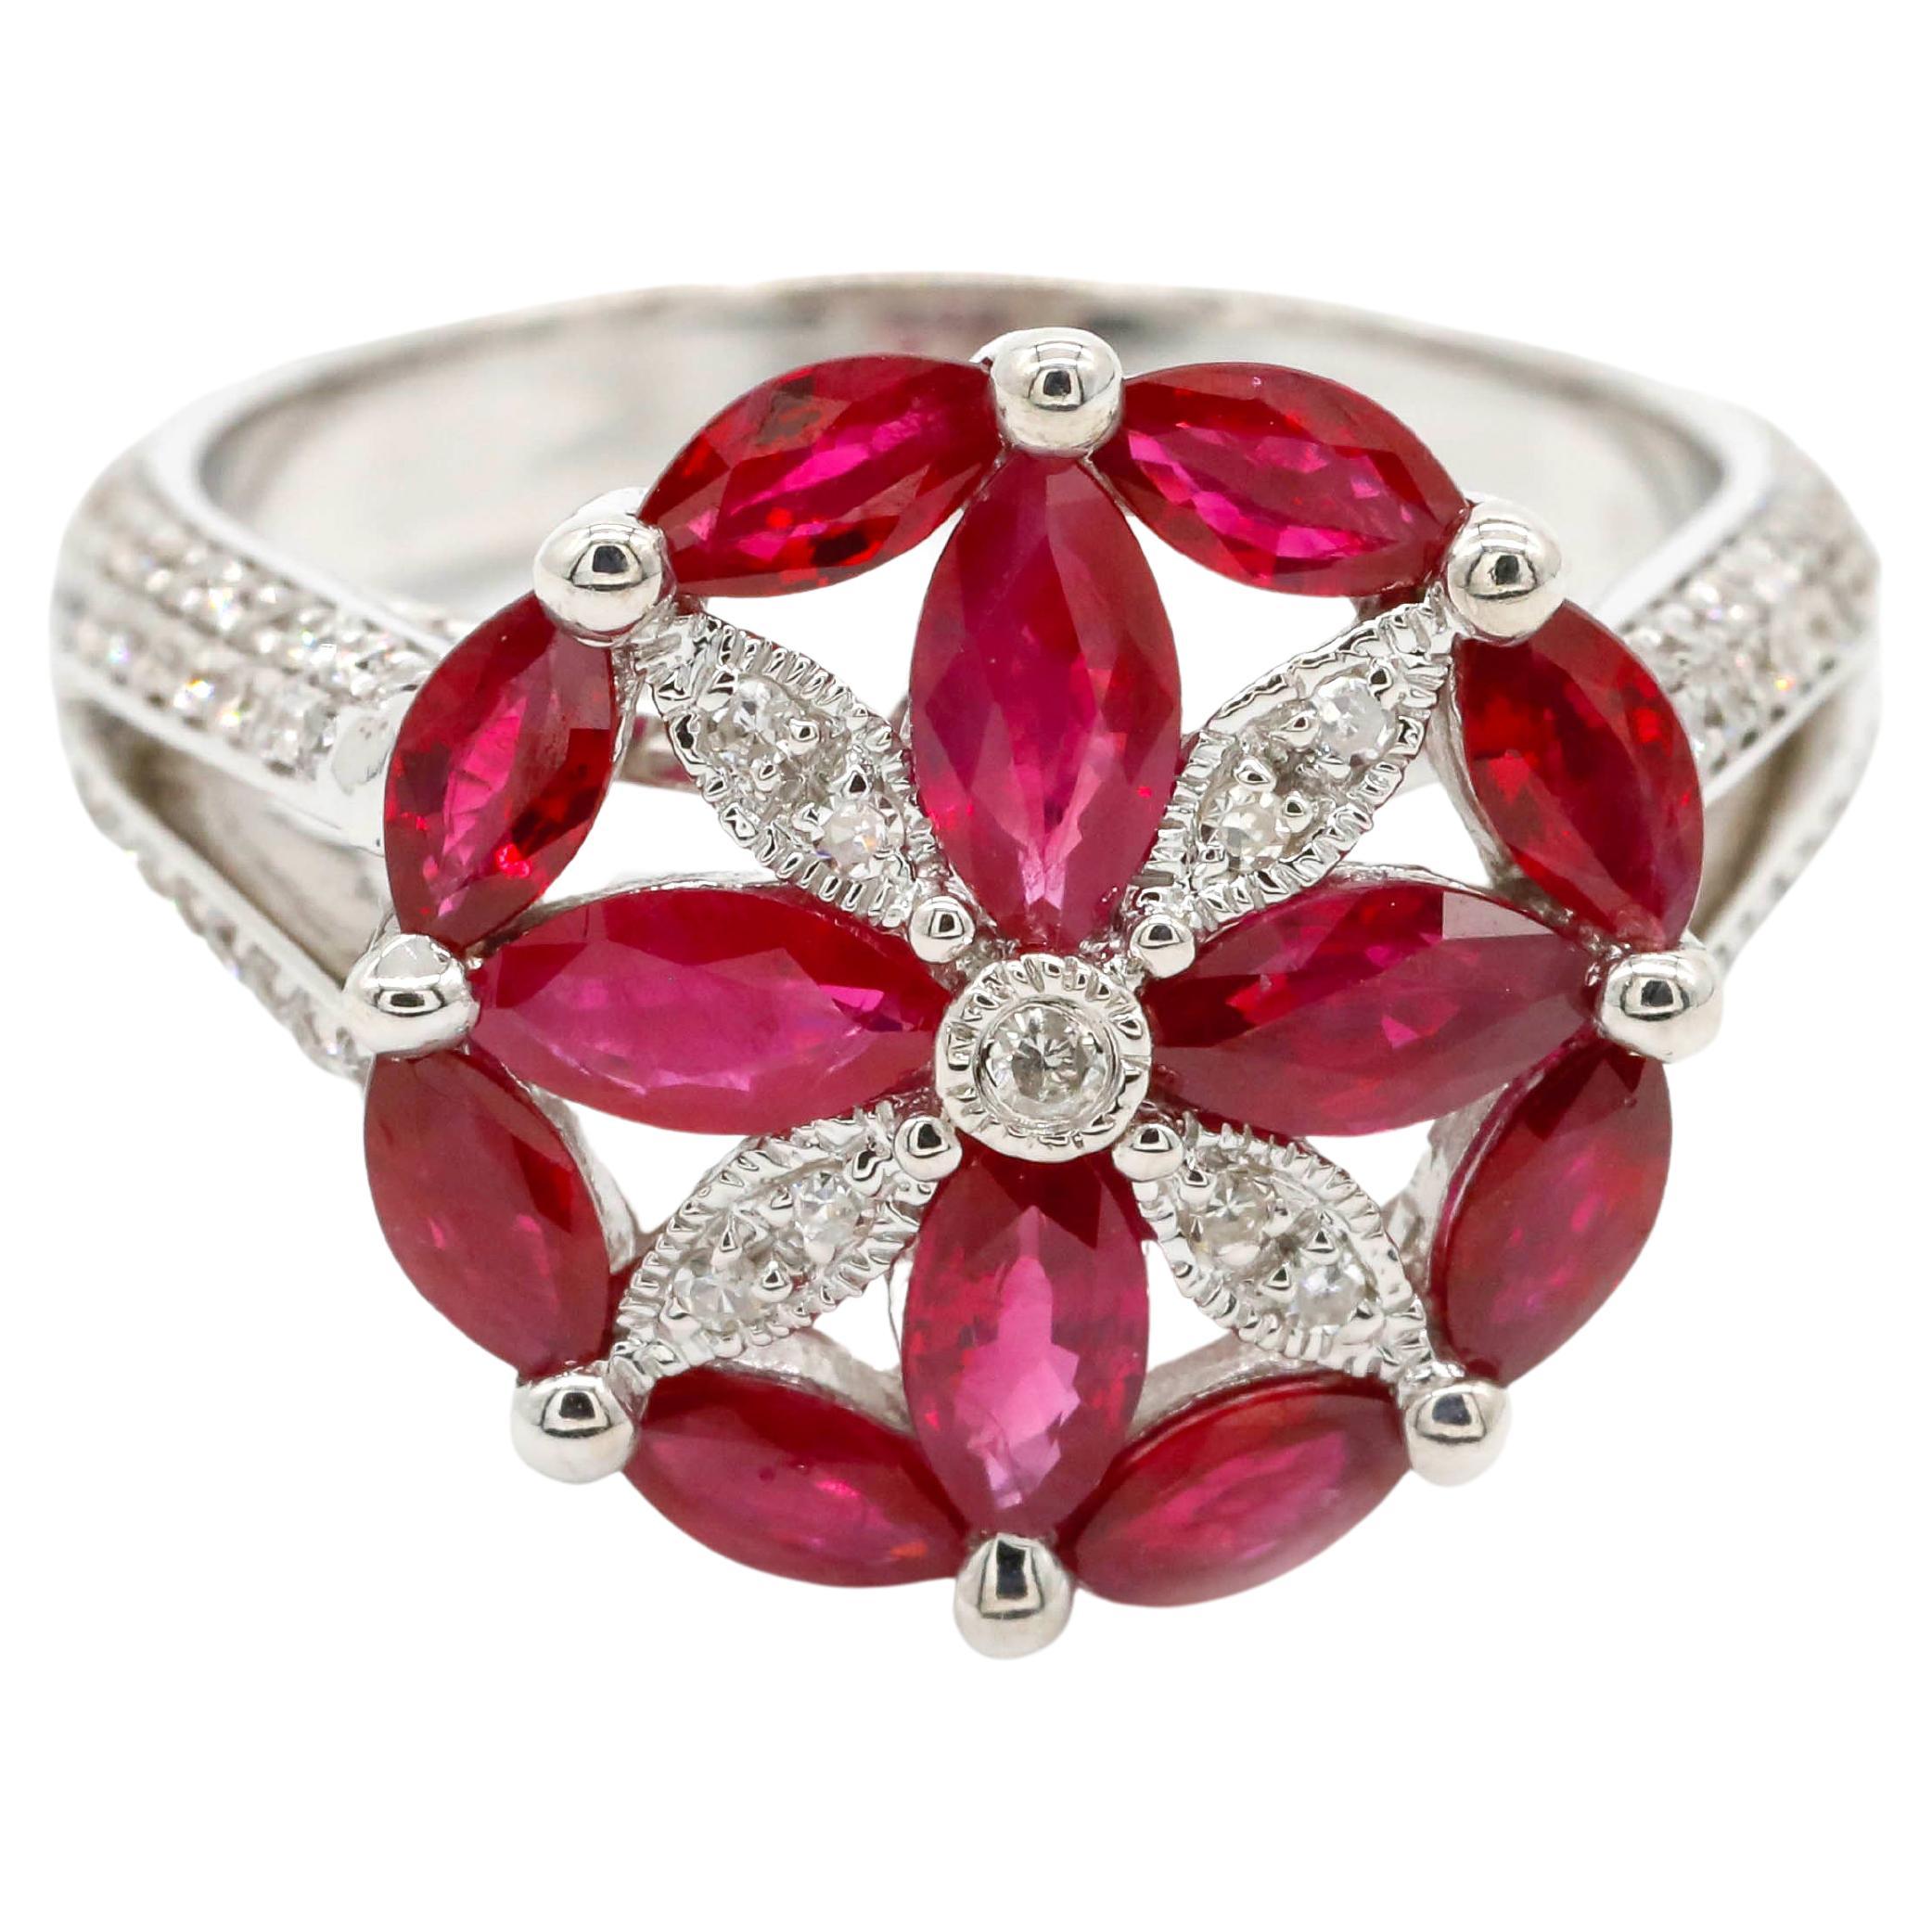 1.00 Carat Marquise Cut Ruby and Round Diamond Pave 18K White Gold Cocktail Ring

A wedding band or an Anniversary ring - this ring is just perfection. Featuring a Double row of 1.00 Carat natural Marquise Cut Ruby stones , set in a Prong setting.